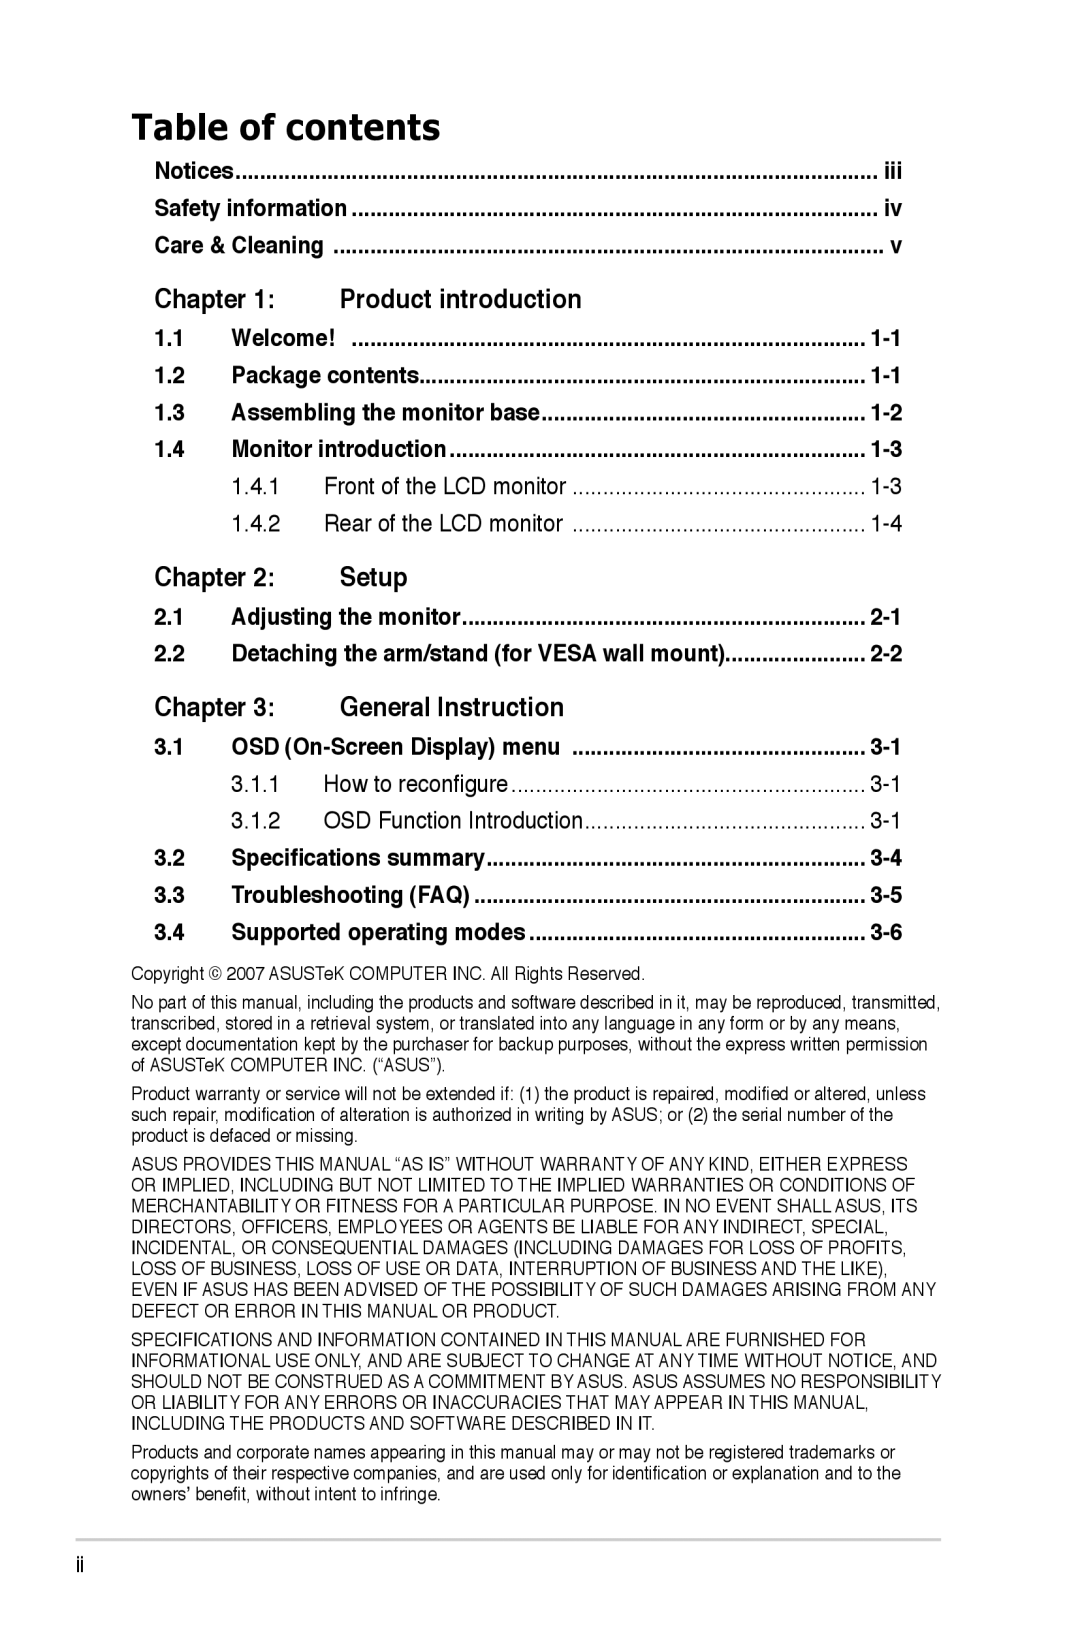 Asus VW193 manual Table of contents, Chapter, Product introduction, Setup, General Instruction, 1.4.1, 1.4.2, 3.1.1, 3.1.2 